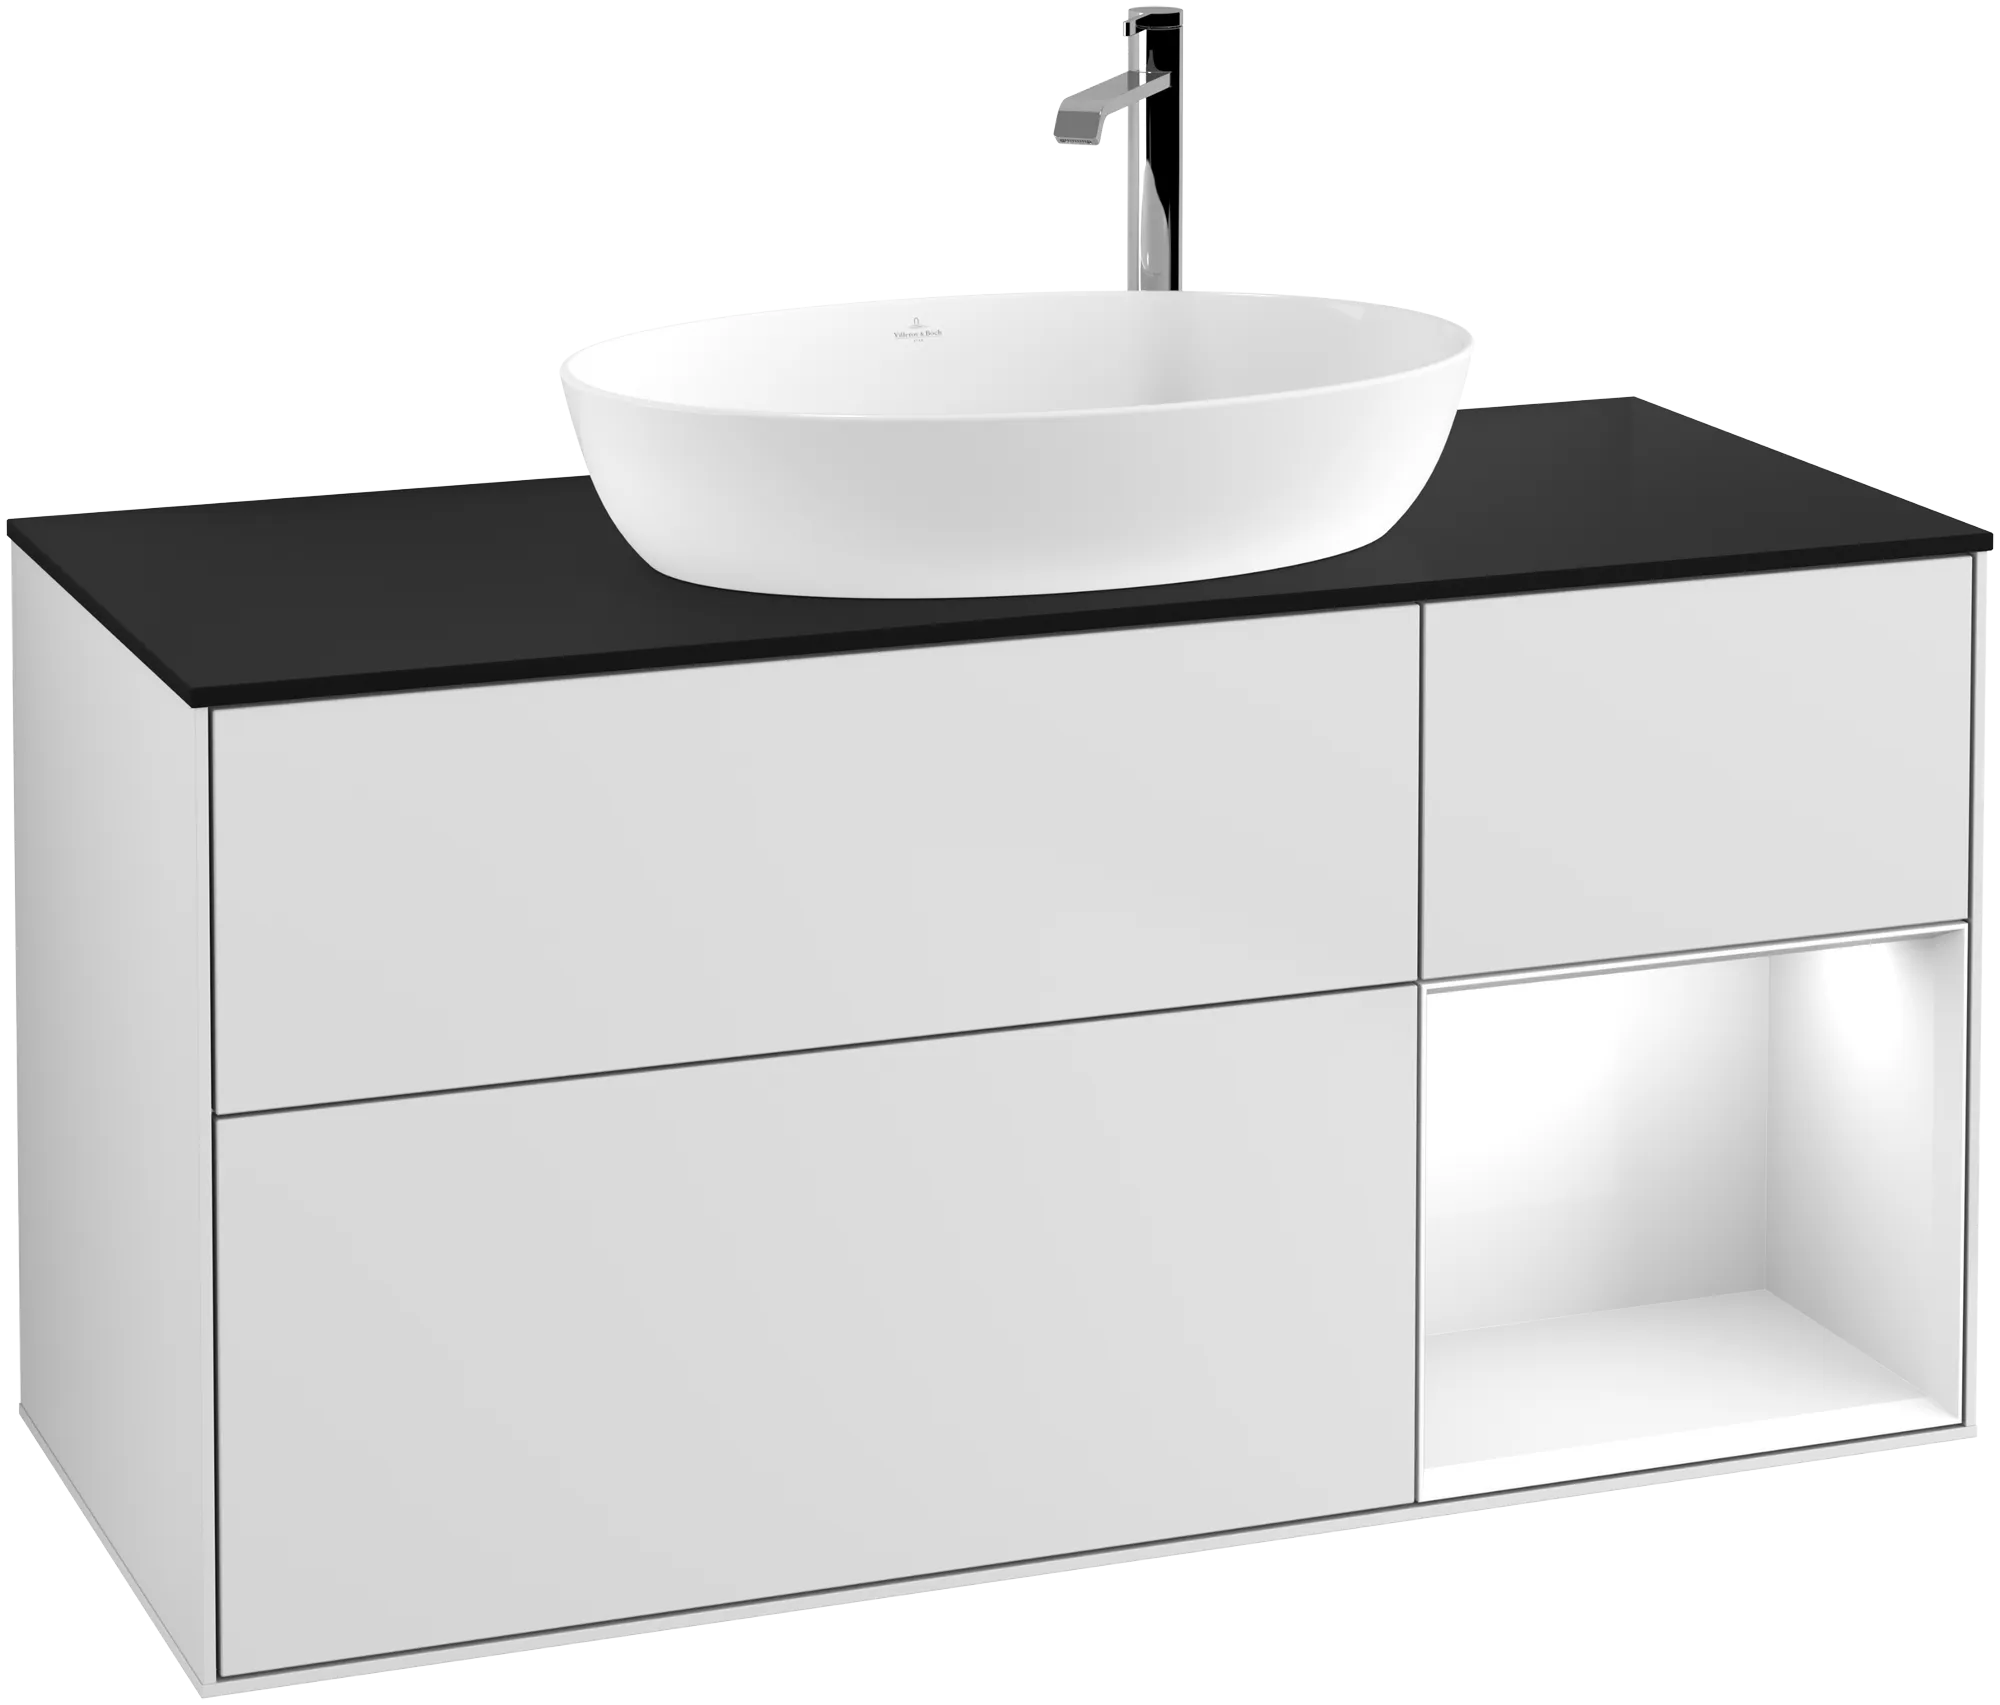 VILLEROY BOCH Finion Vanity unit, with lighting, 3 pull-out compartments, 1200 x 603 x 501 mm, White Matt Lacquer / Glossy White Lacquer / Glass Black Matt #G952GFMT resmi